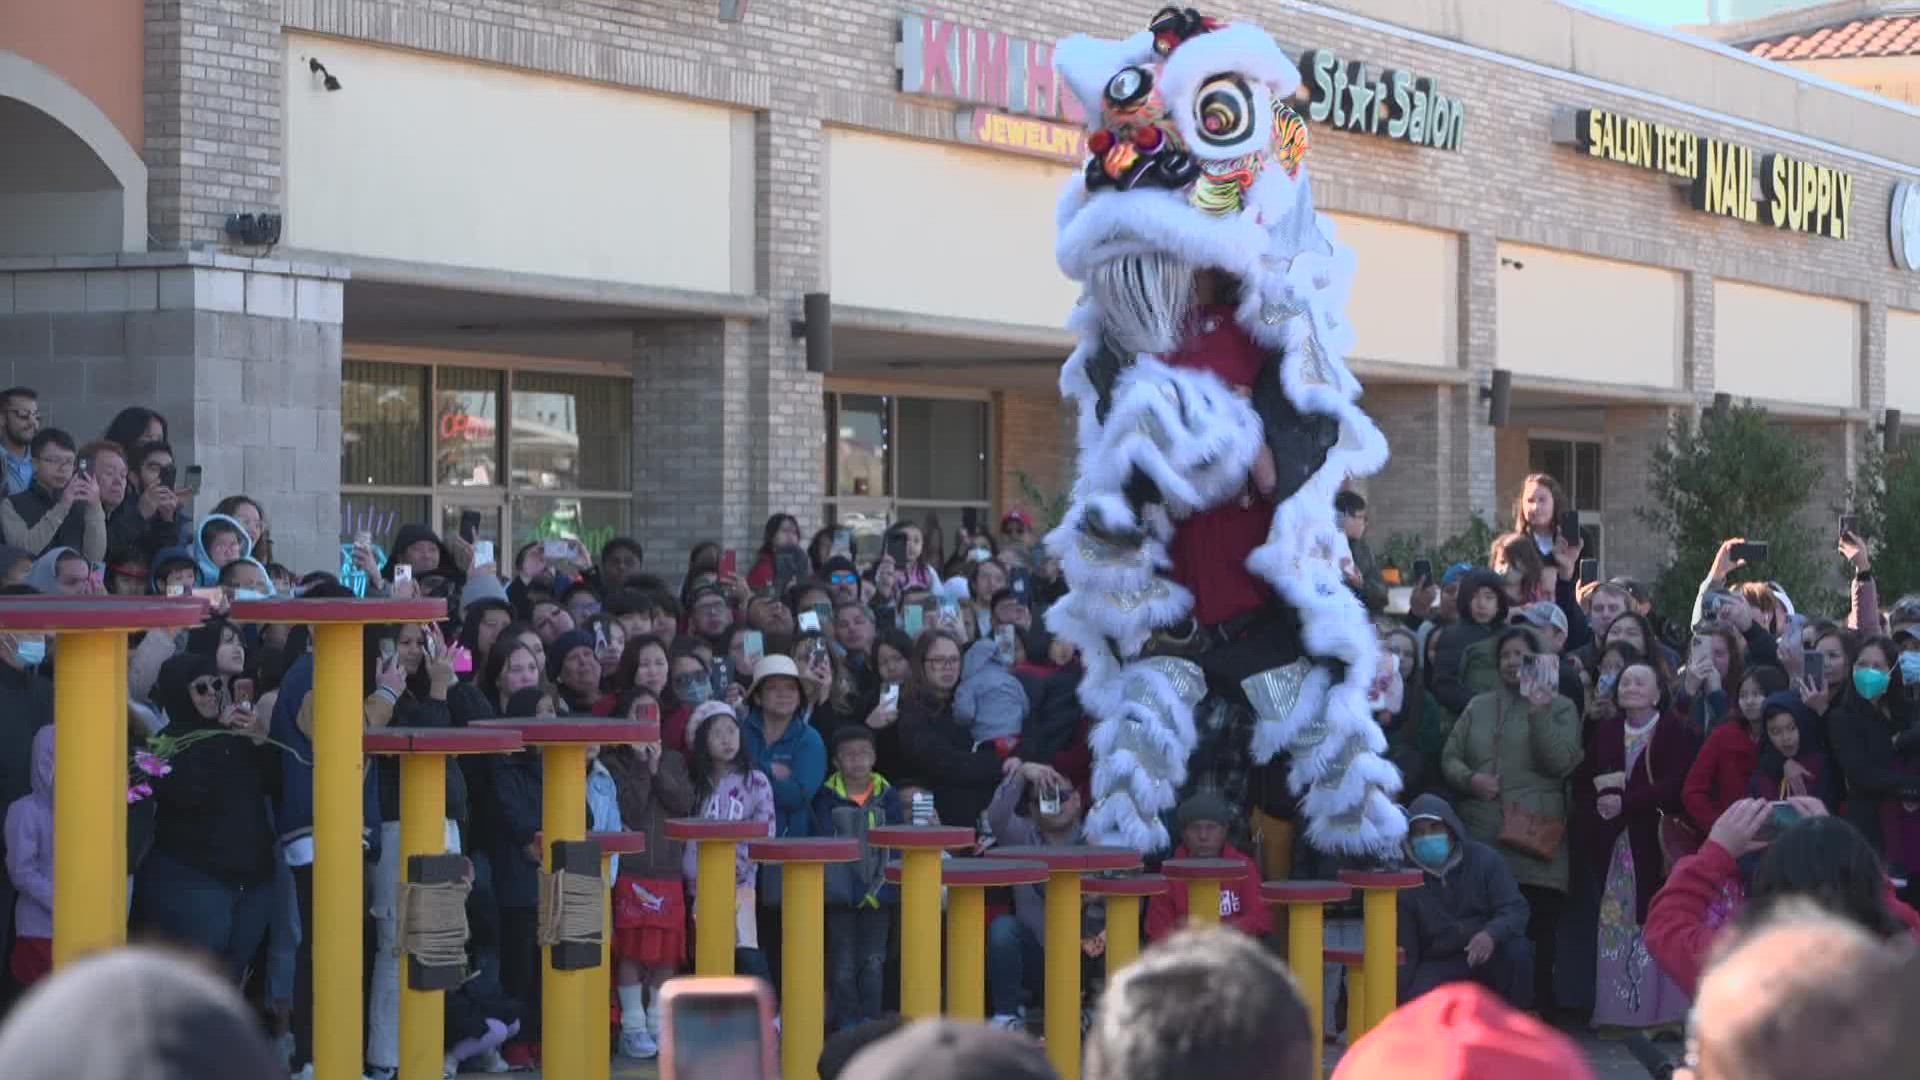 Residents attended Lunar New Year events in North Texas and learned more about different cultures.